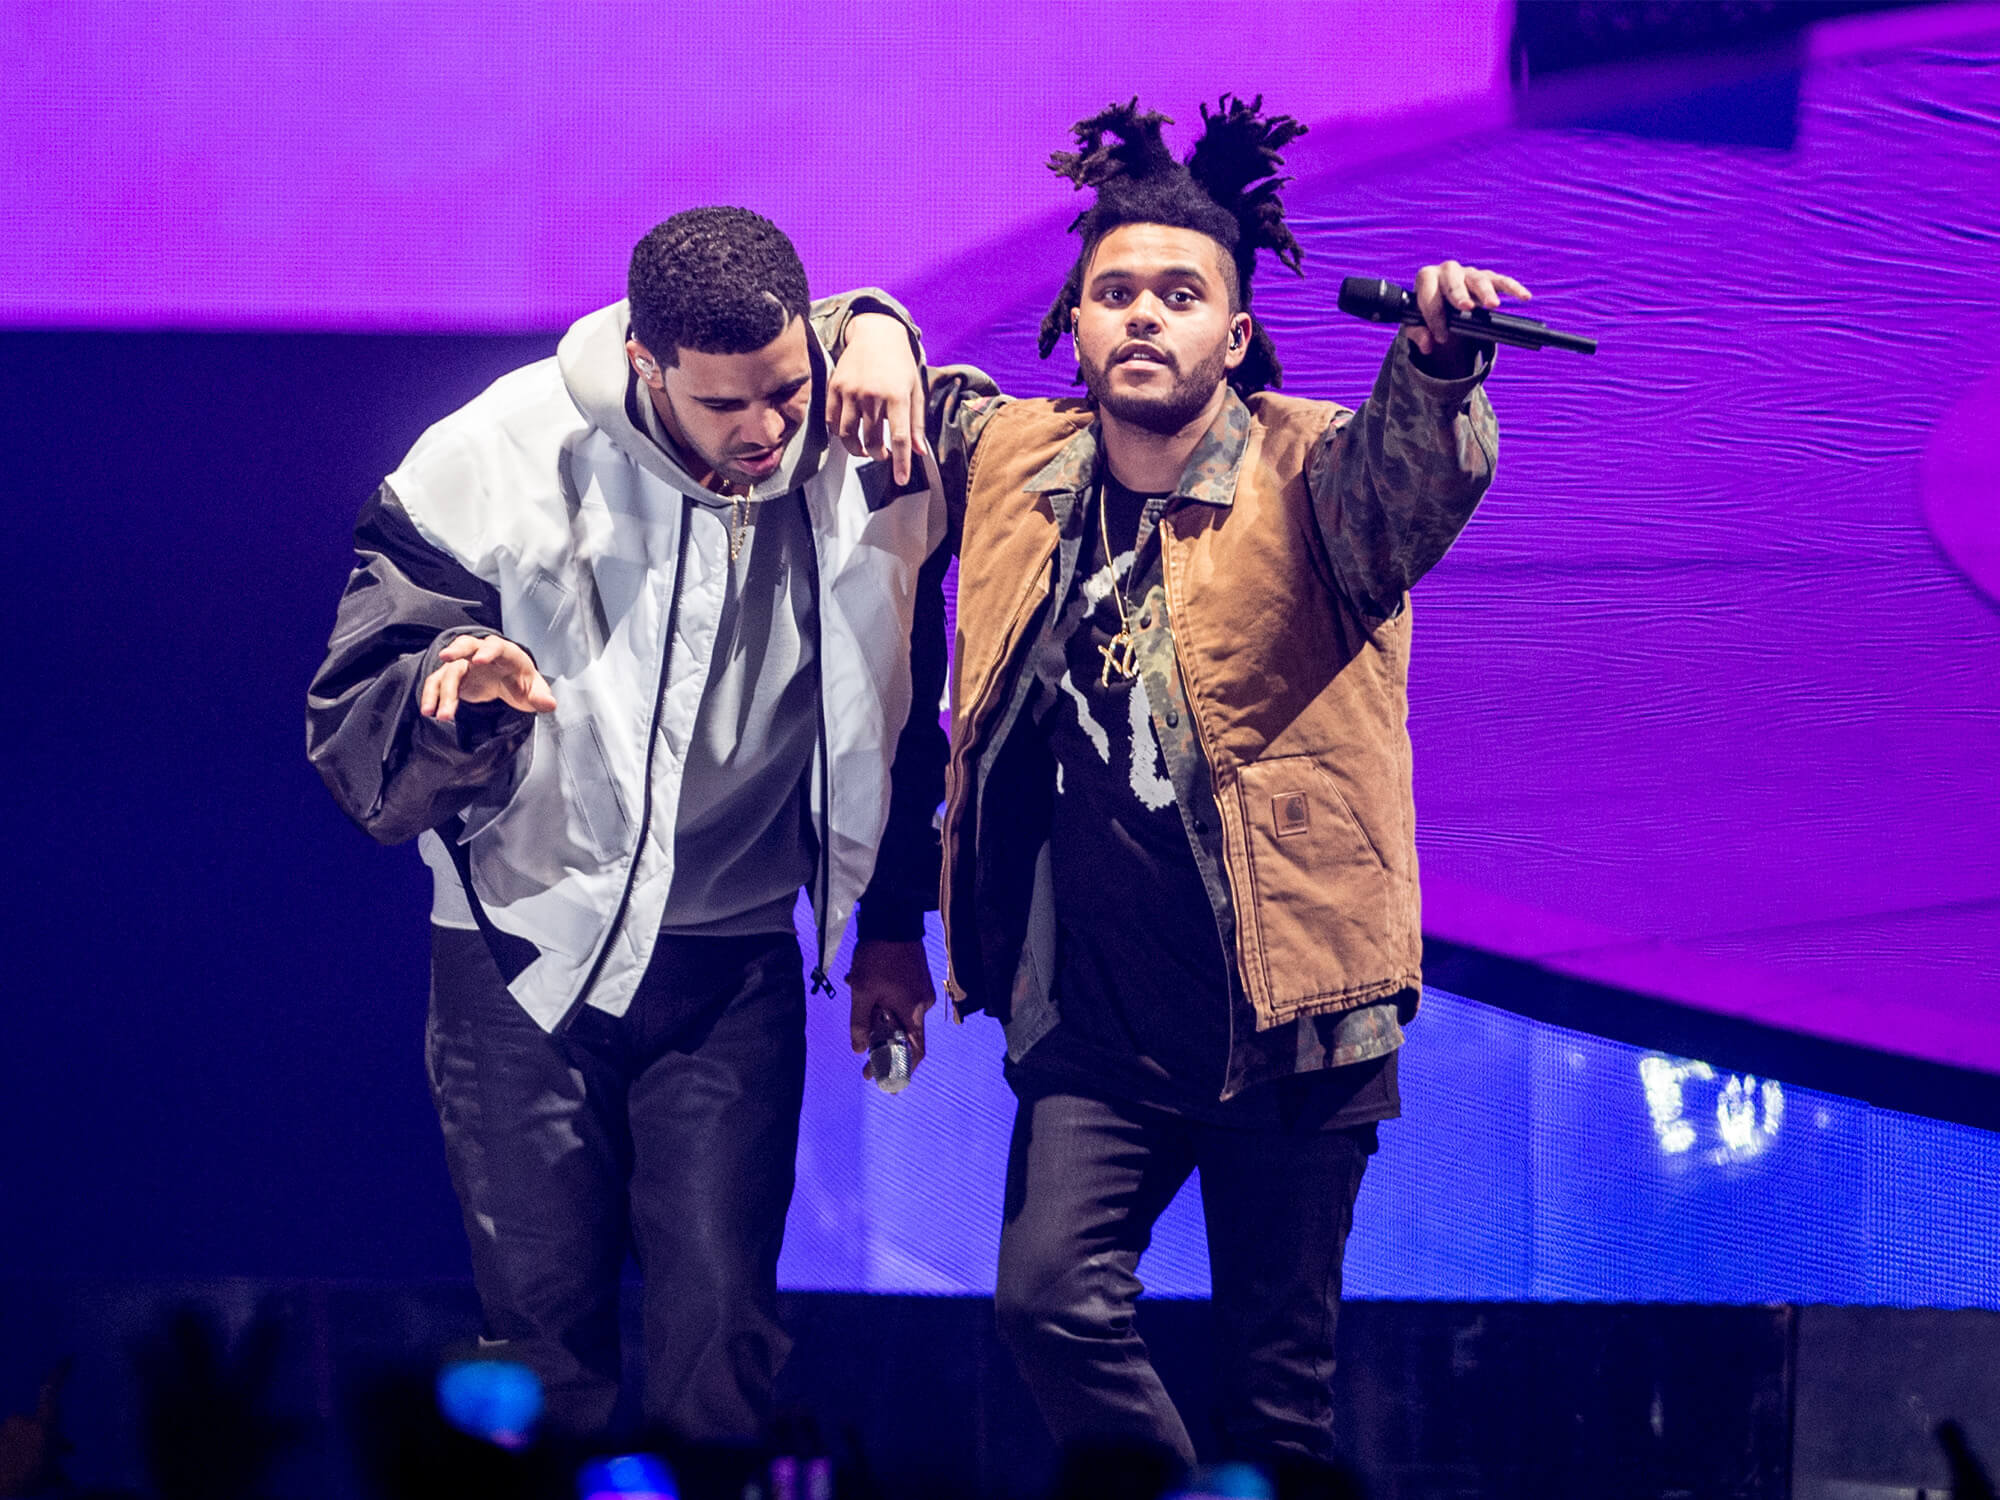 Drake and The Weeknd on stage in 2014. They have their arms around each other and mics in hand.